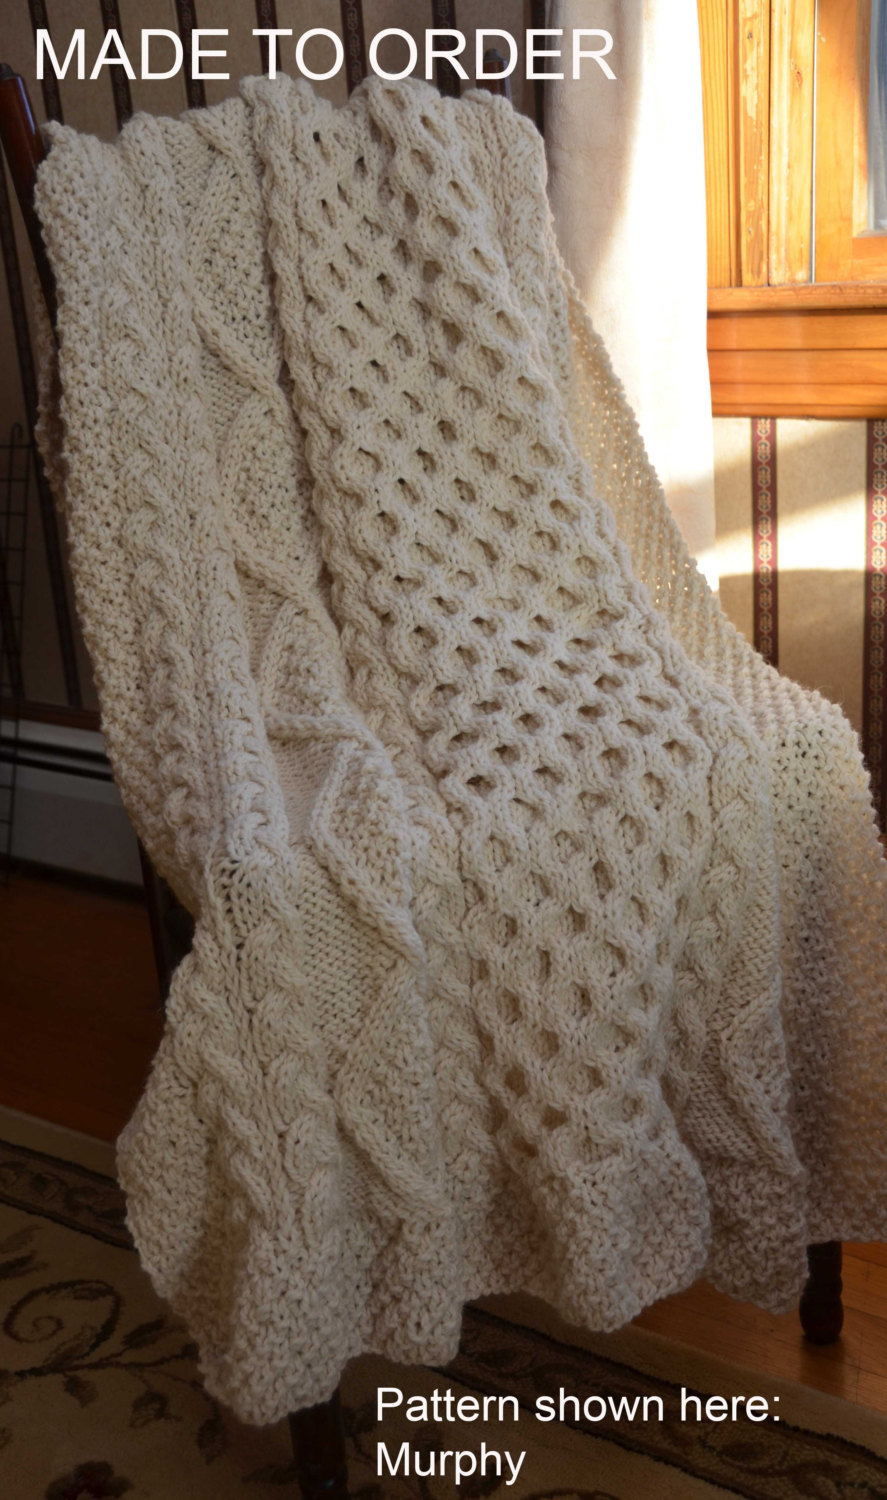 Hand Knitted Throw Patterns Irish Fisherman Inspired Hand Knit Throw Blanket Made To Order